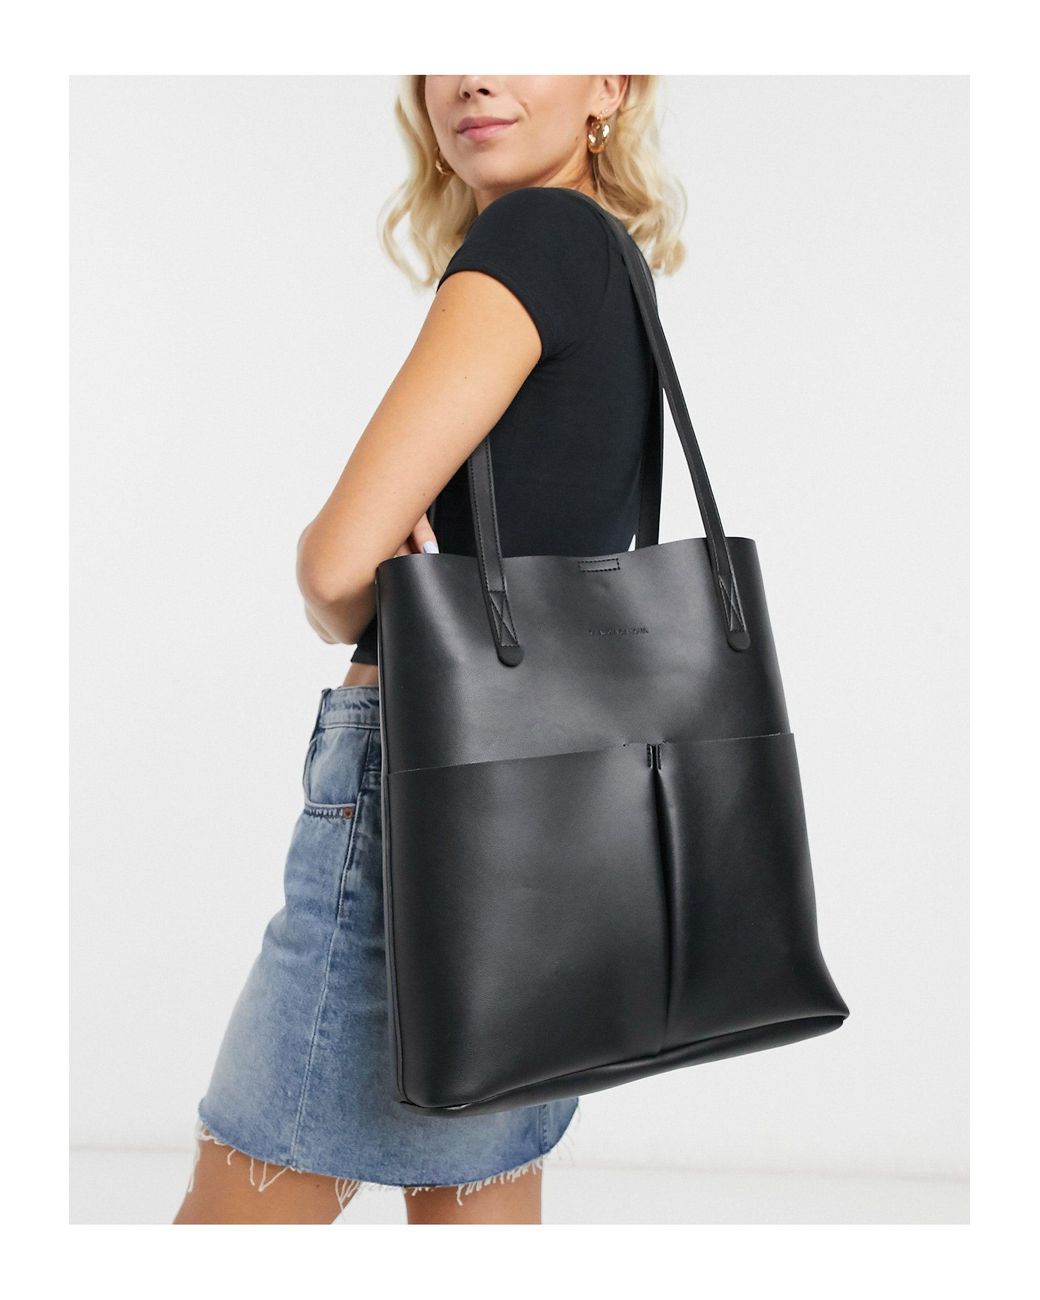 Claudia Canova Unlined Two Pocket Tote Bag in Black | Lyst UK